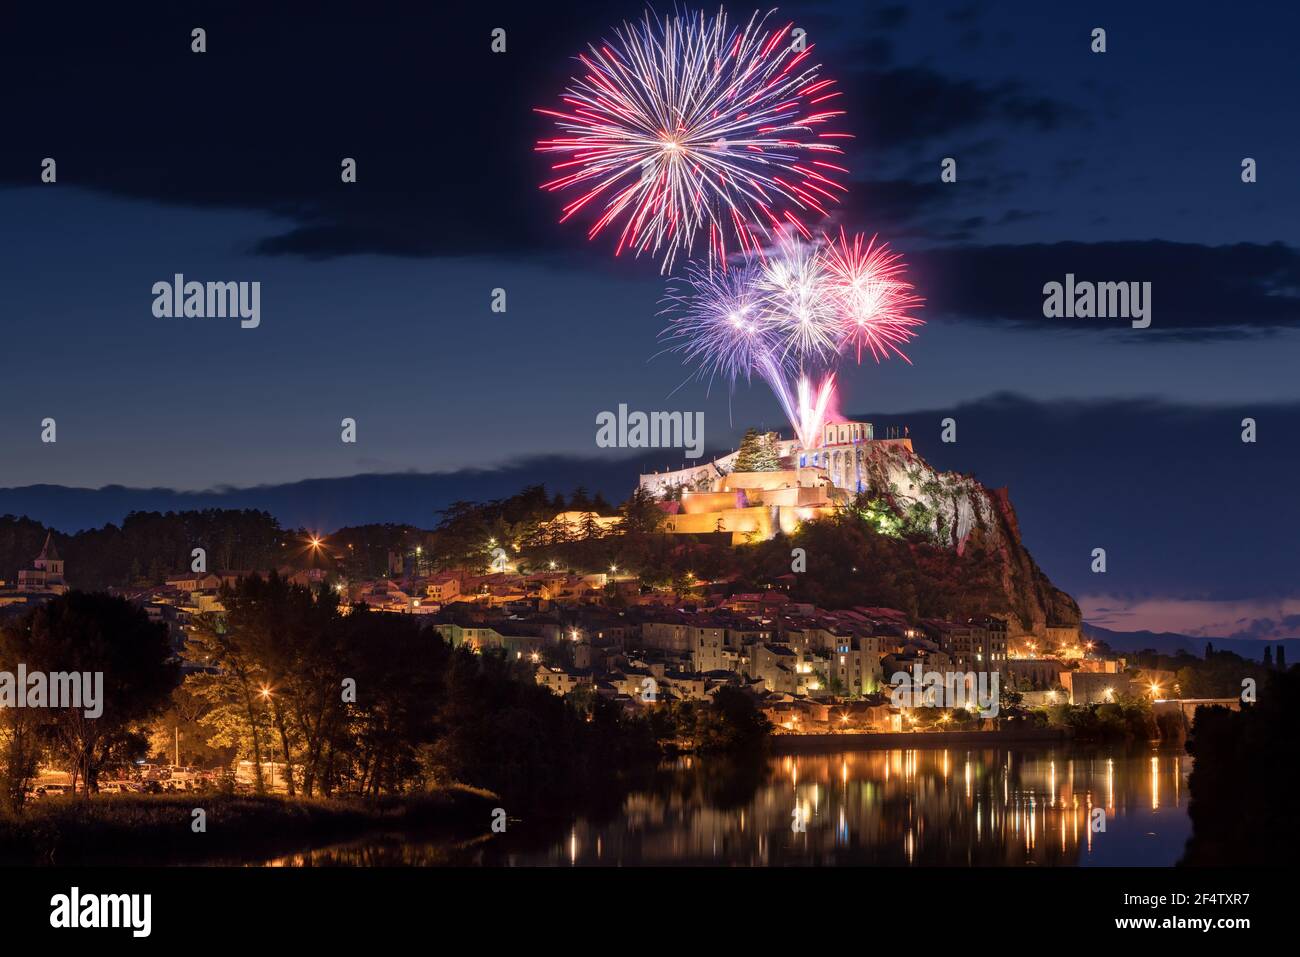 Sisteron with 14th of July fireworks (Bastille Day celebration) over the Citadel at twilight. Durance Valley, Alpes-de-Haute-Provence, France Stock Photo